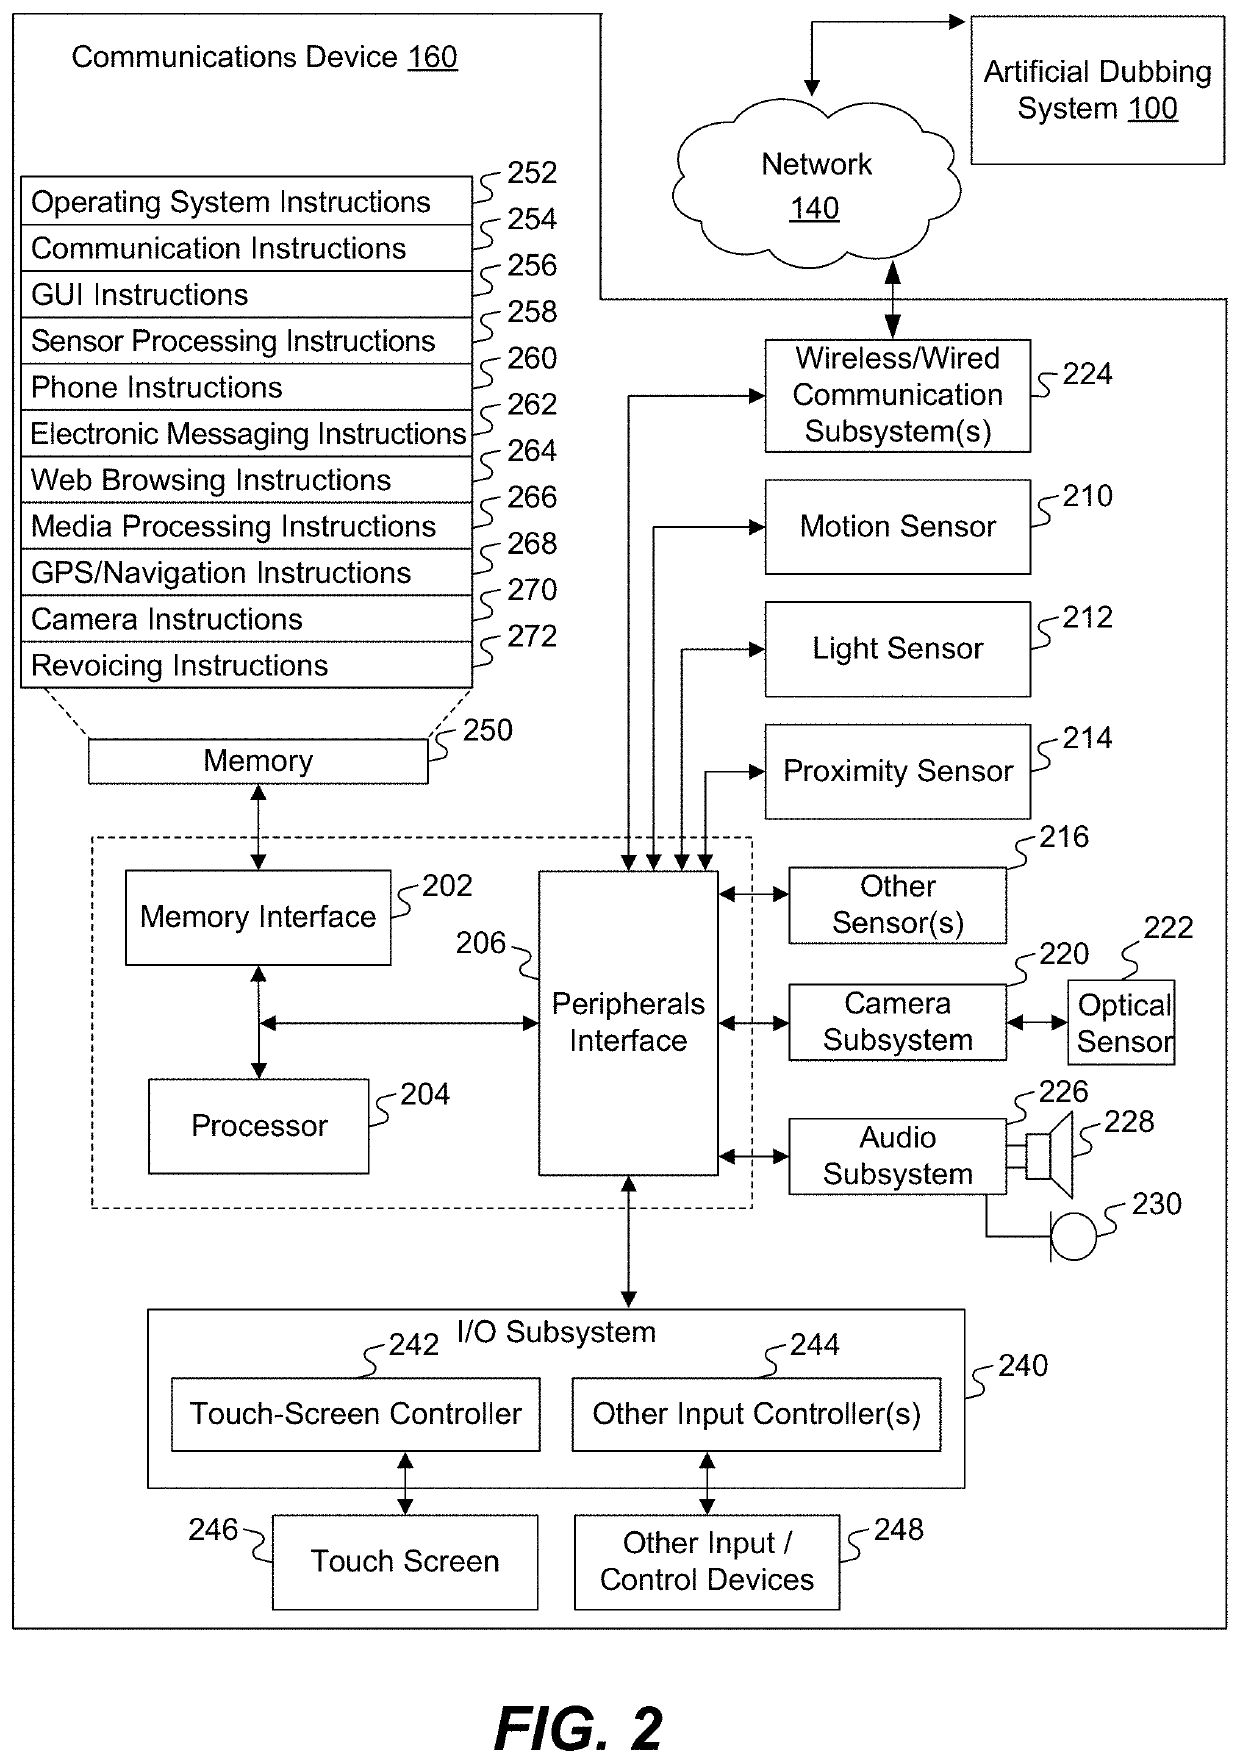 Systems and methods for artificial dubbing